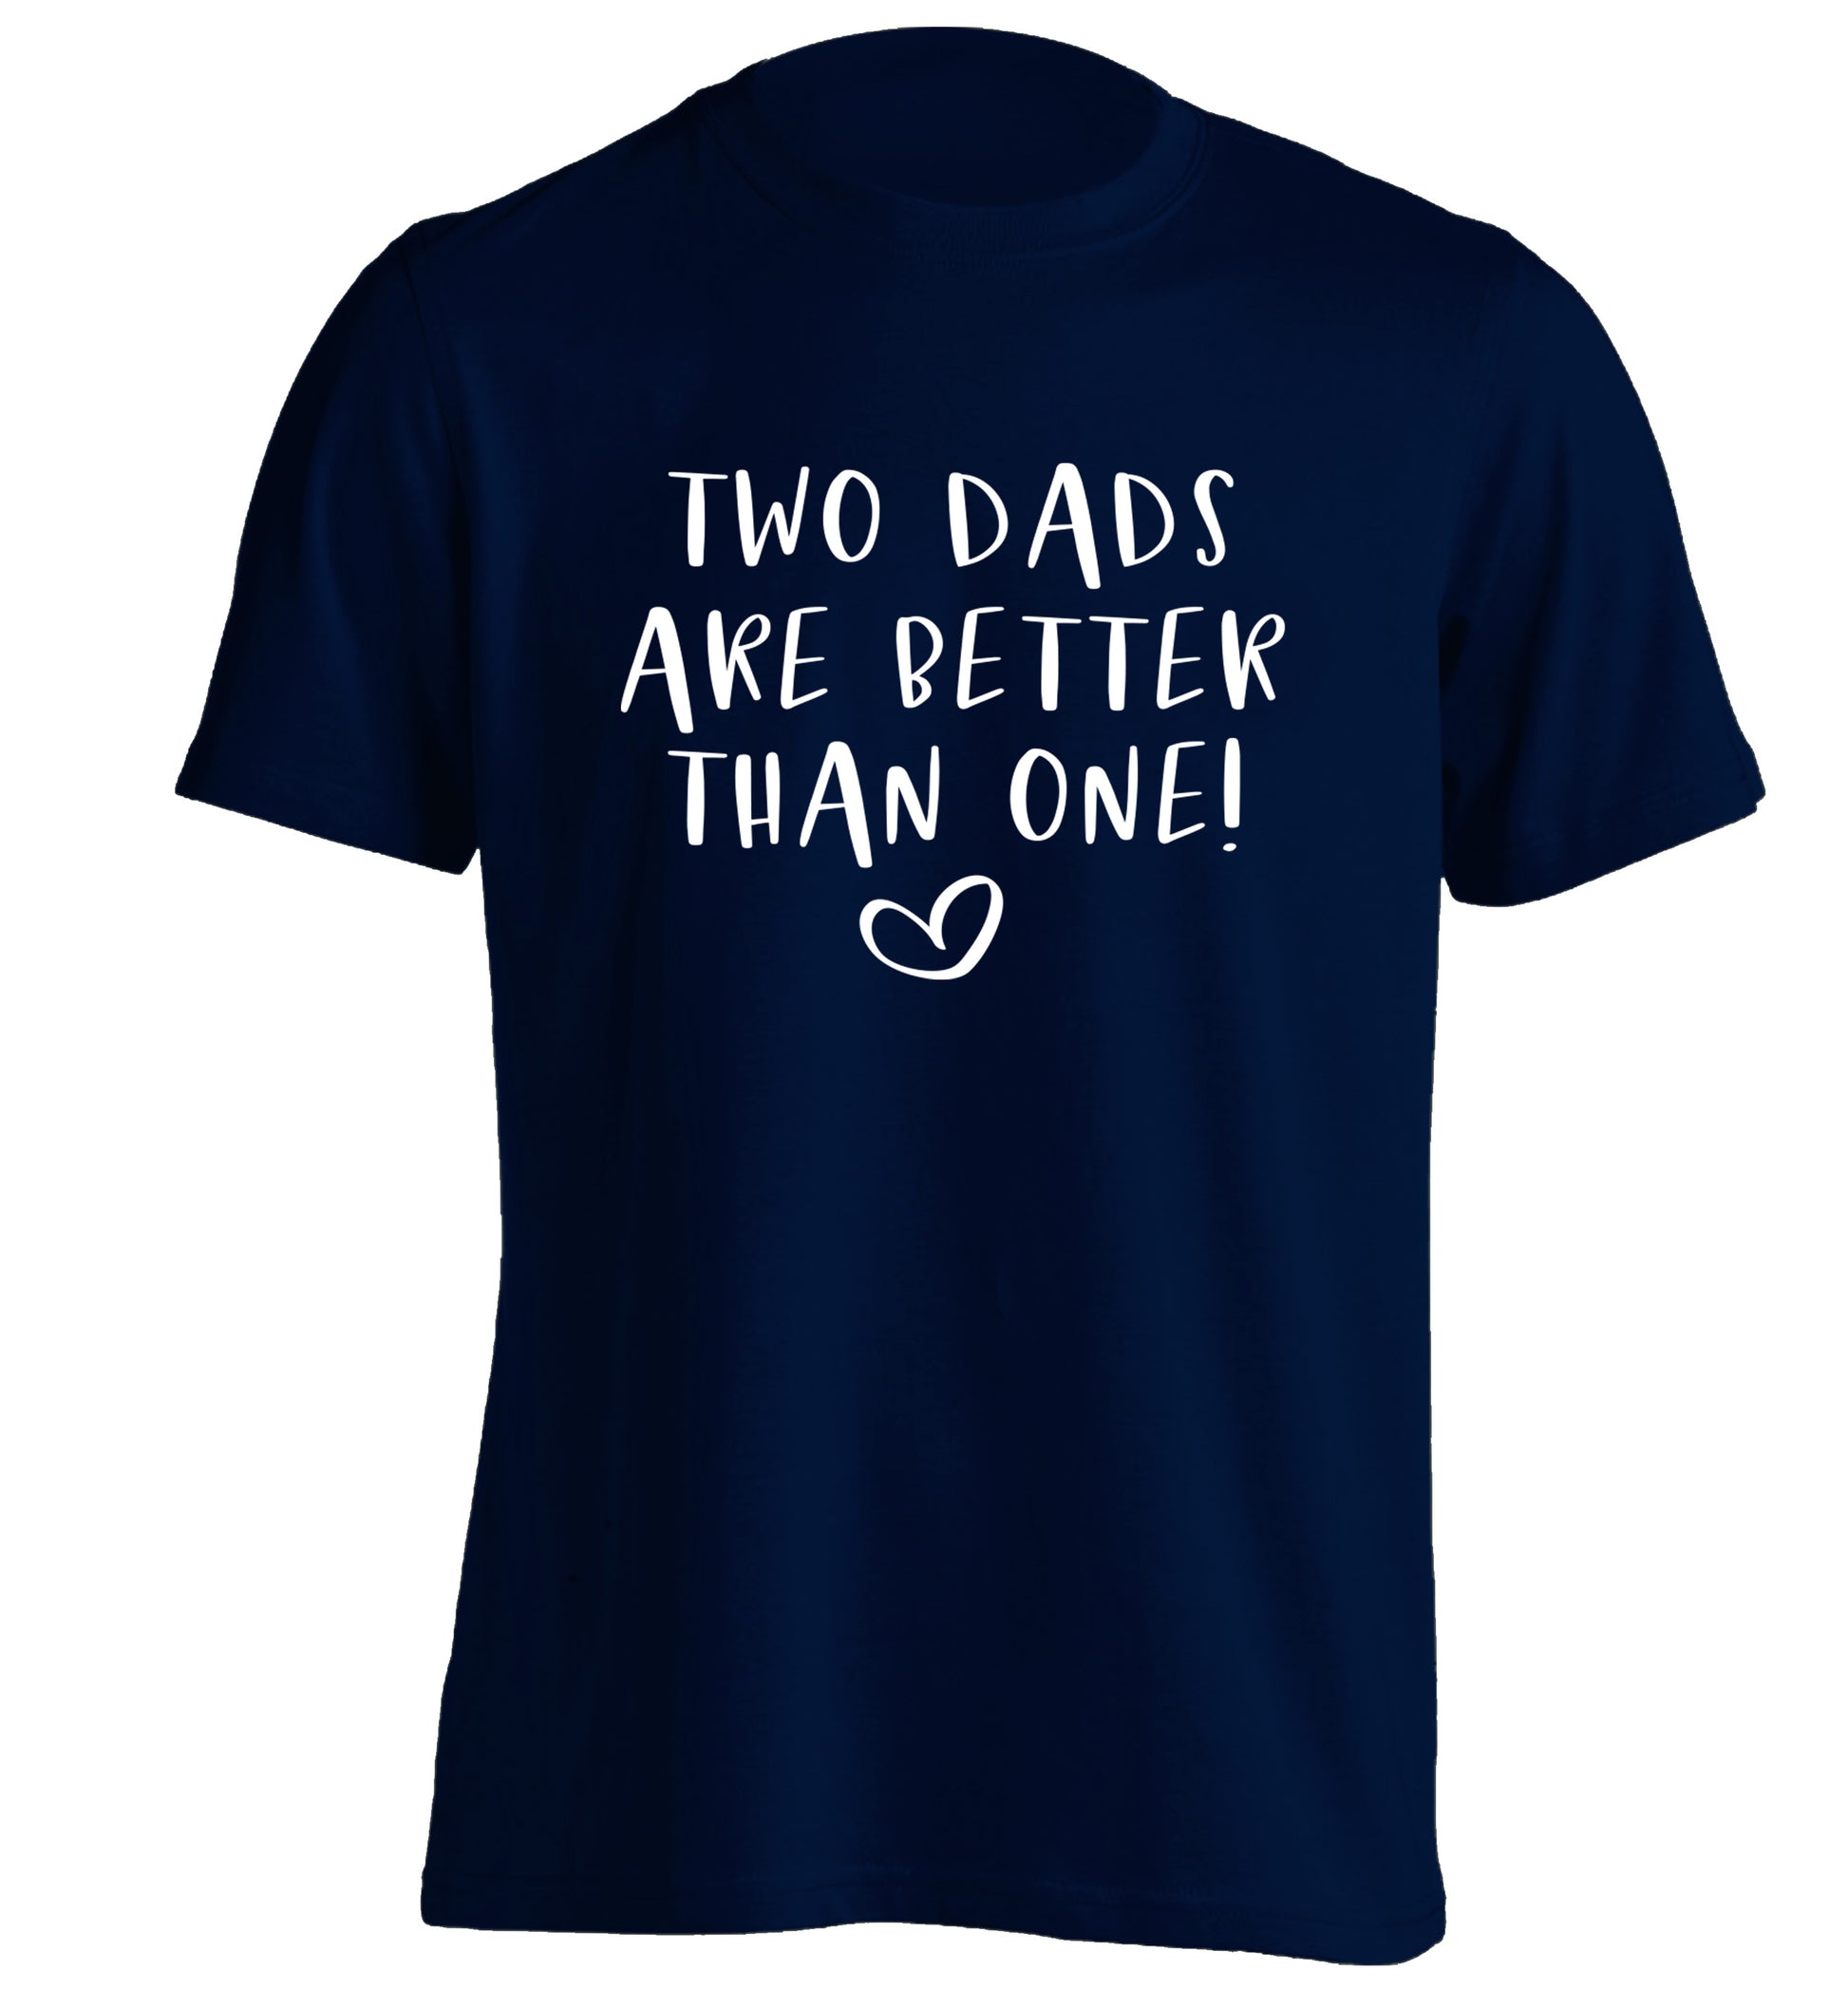 Two dads are better than one adults unisex navy Tshirt 2XL